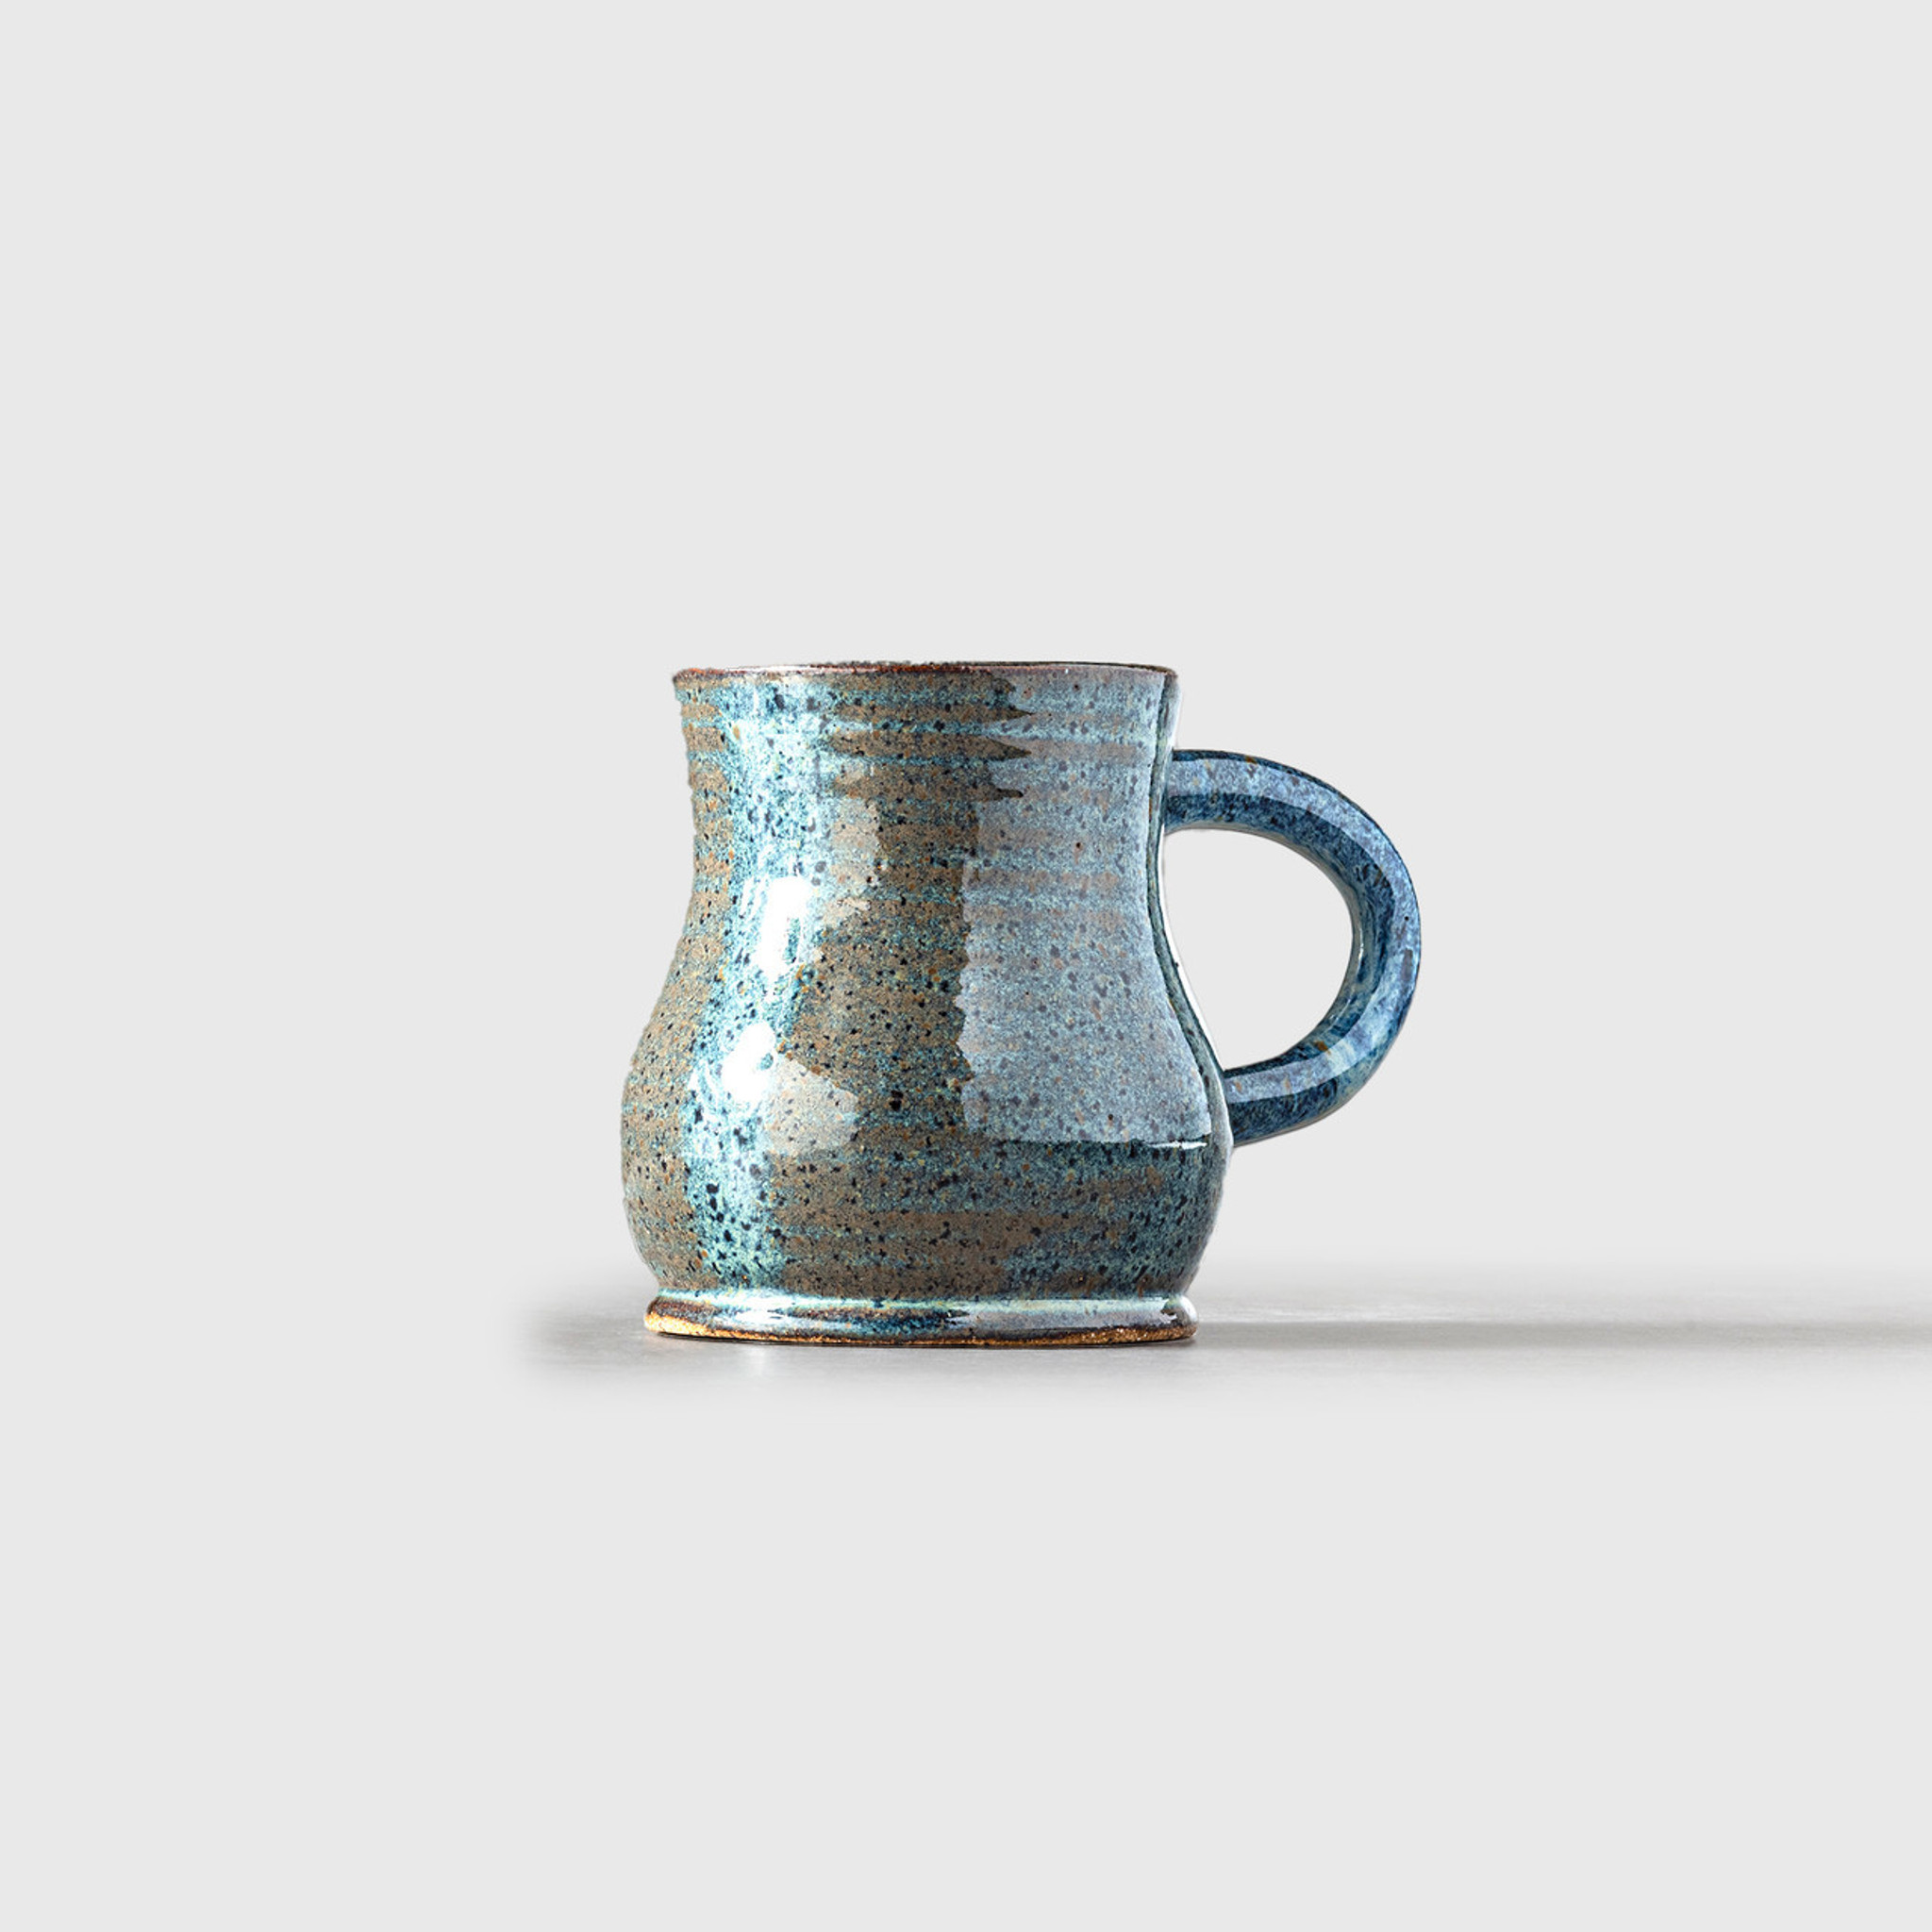 Simple Mug in Woo's Blue, by  RVPottery, elk & HAMMER Gallery  | available in the elk & HAMMER Gallery of Bozeman, Montana; curated by Ashley Childs, artist, maker, owner and creative director of elk & HAMMER